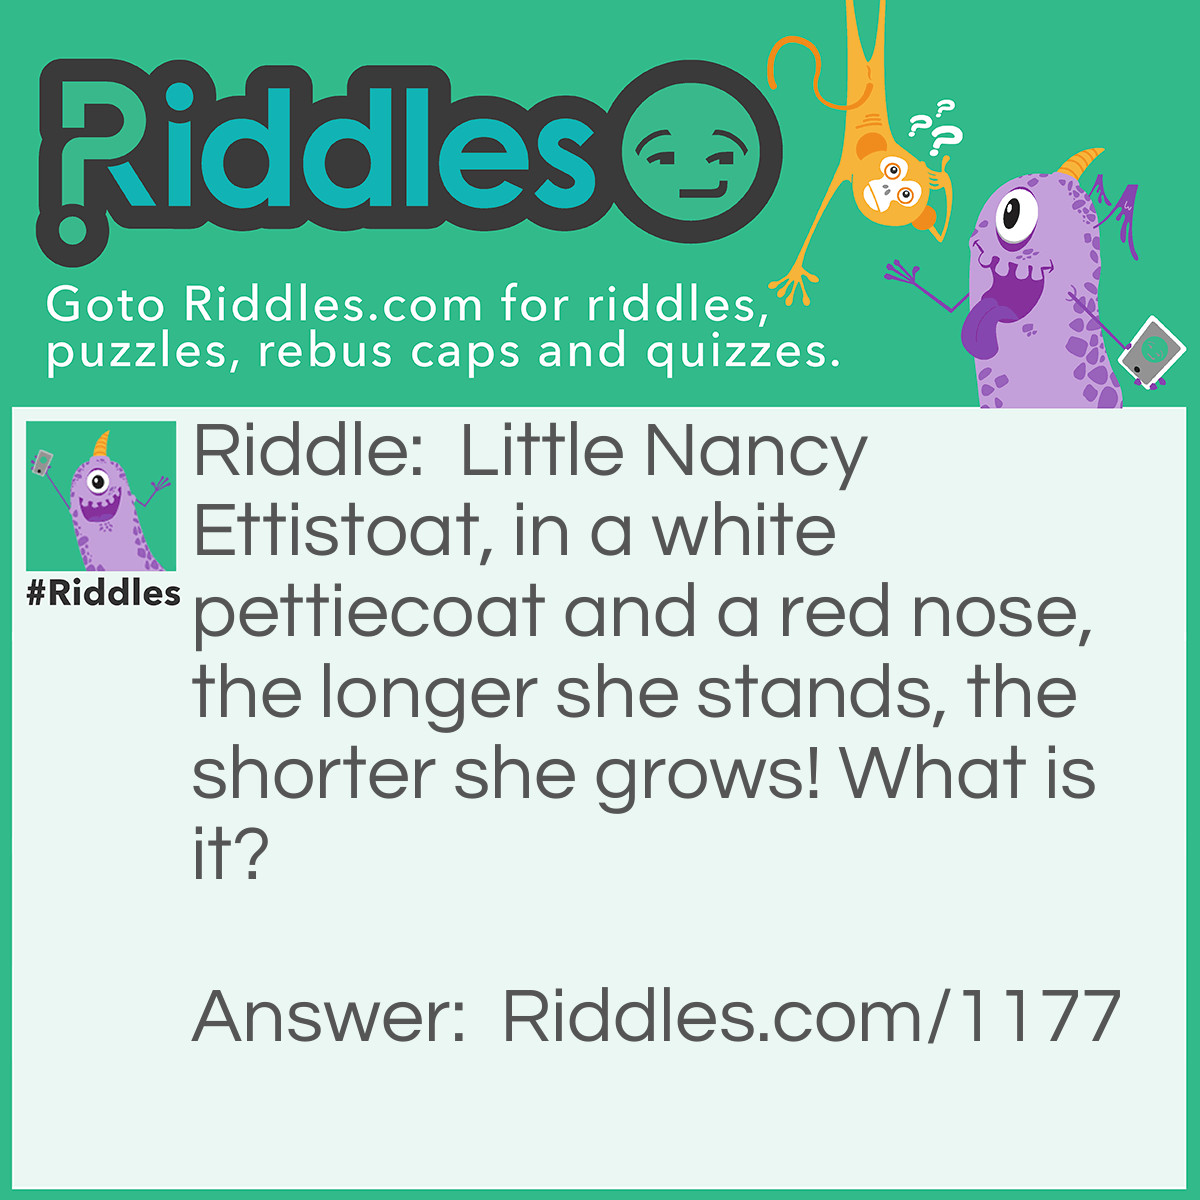 Riddle: Little Nancy Ettistoat, in a white pettiecoat and a red nose, the longer she stands, the shorter she grows! What is it? Answer: A candle.